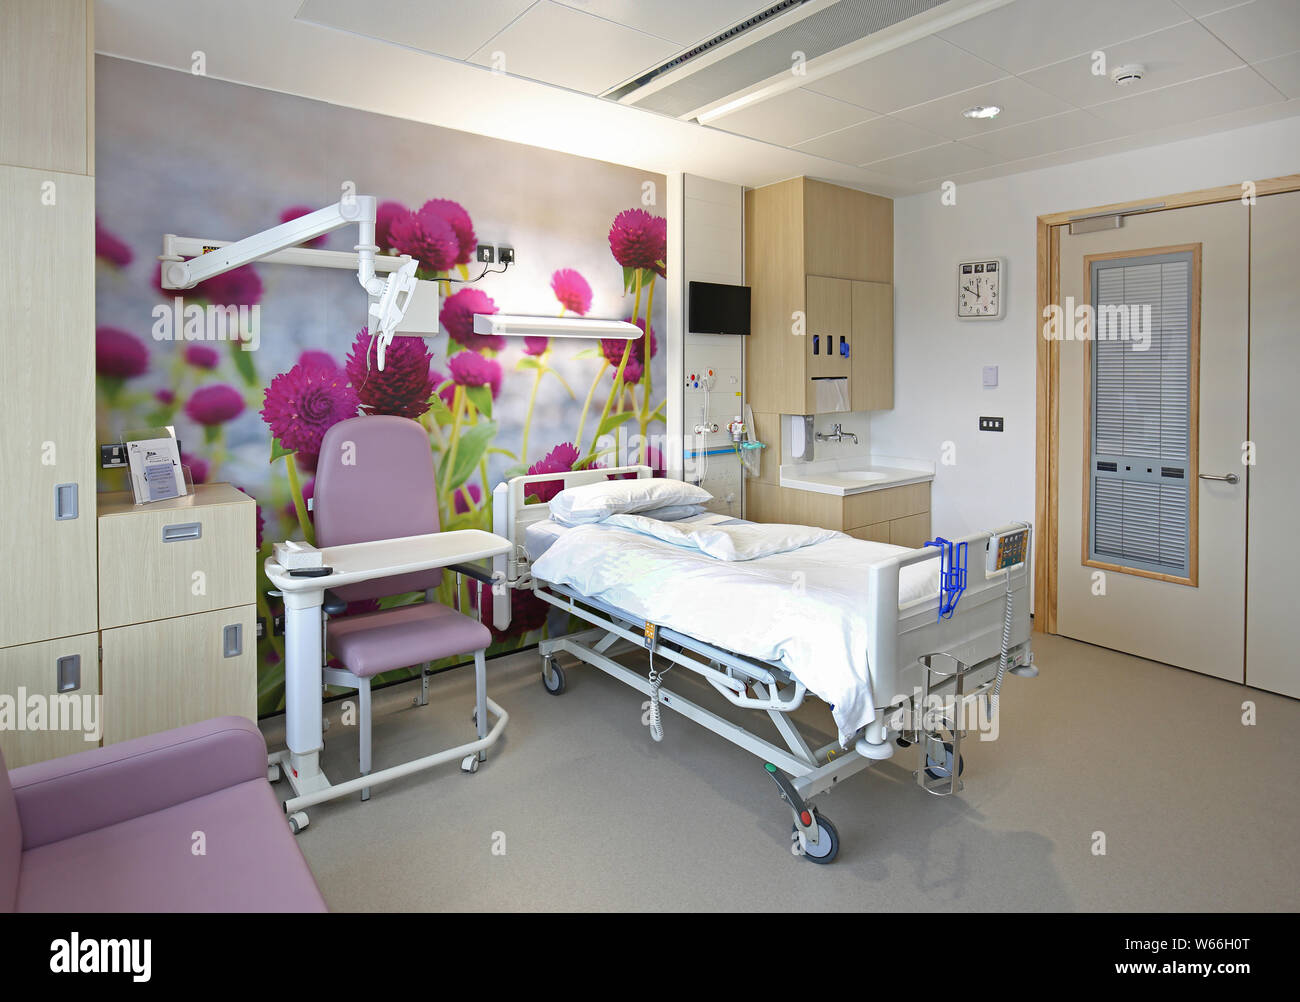 Hospital Ward in the new Stanmore building, Royal National Orthopaedic Hospital, London, UK. Walls feature photo-murals of flowers. Stock Photo